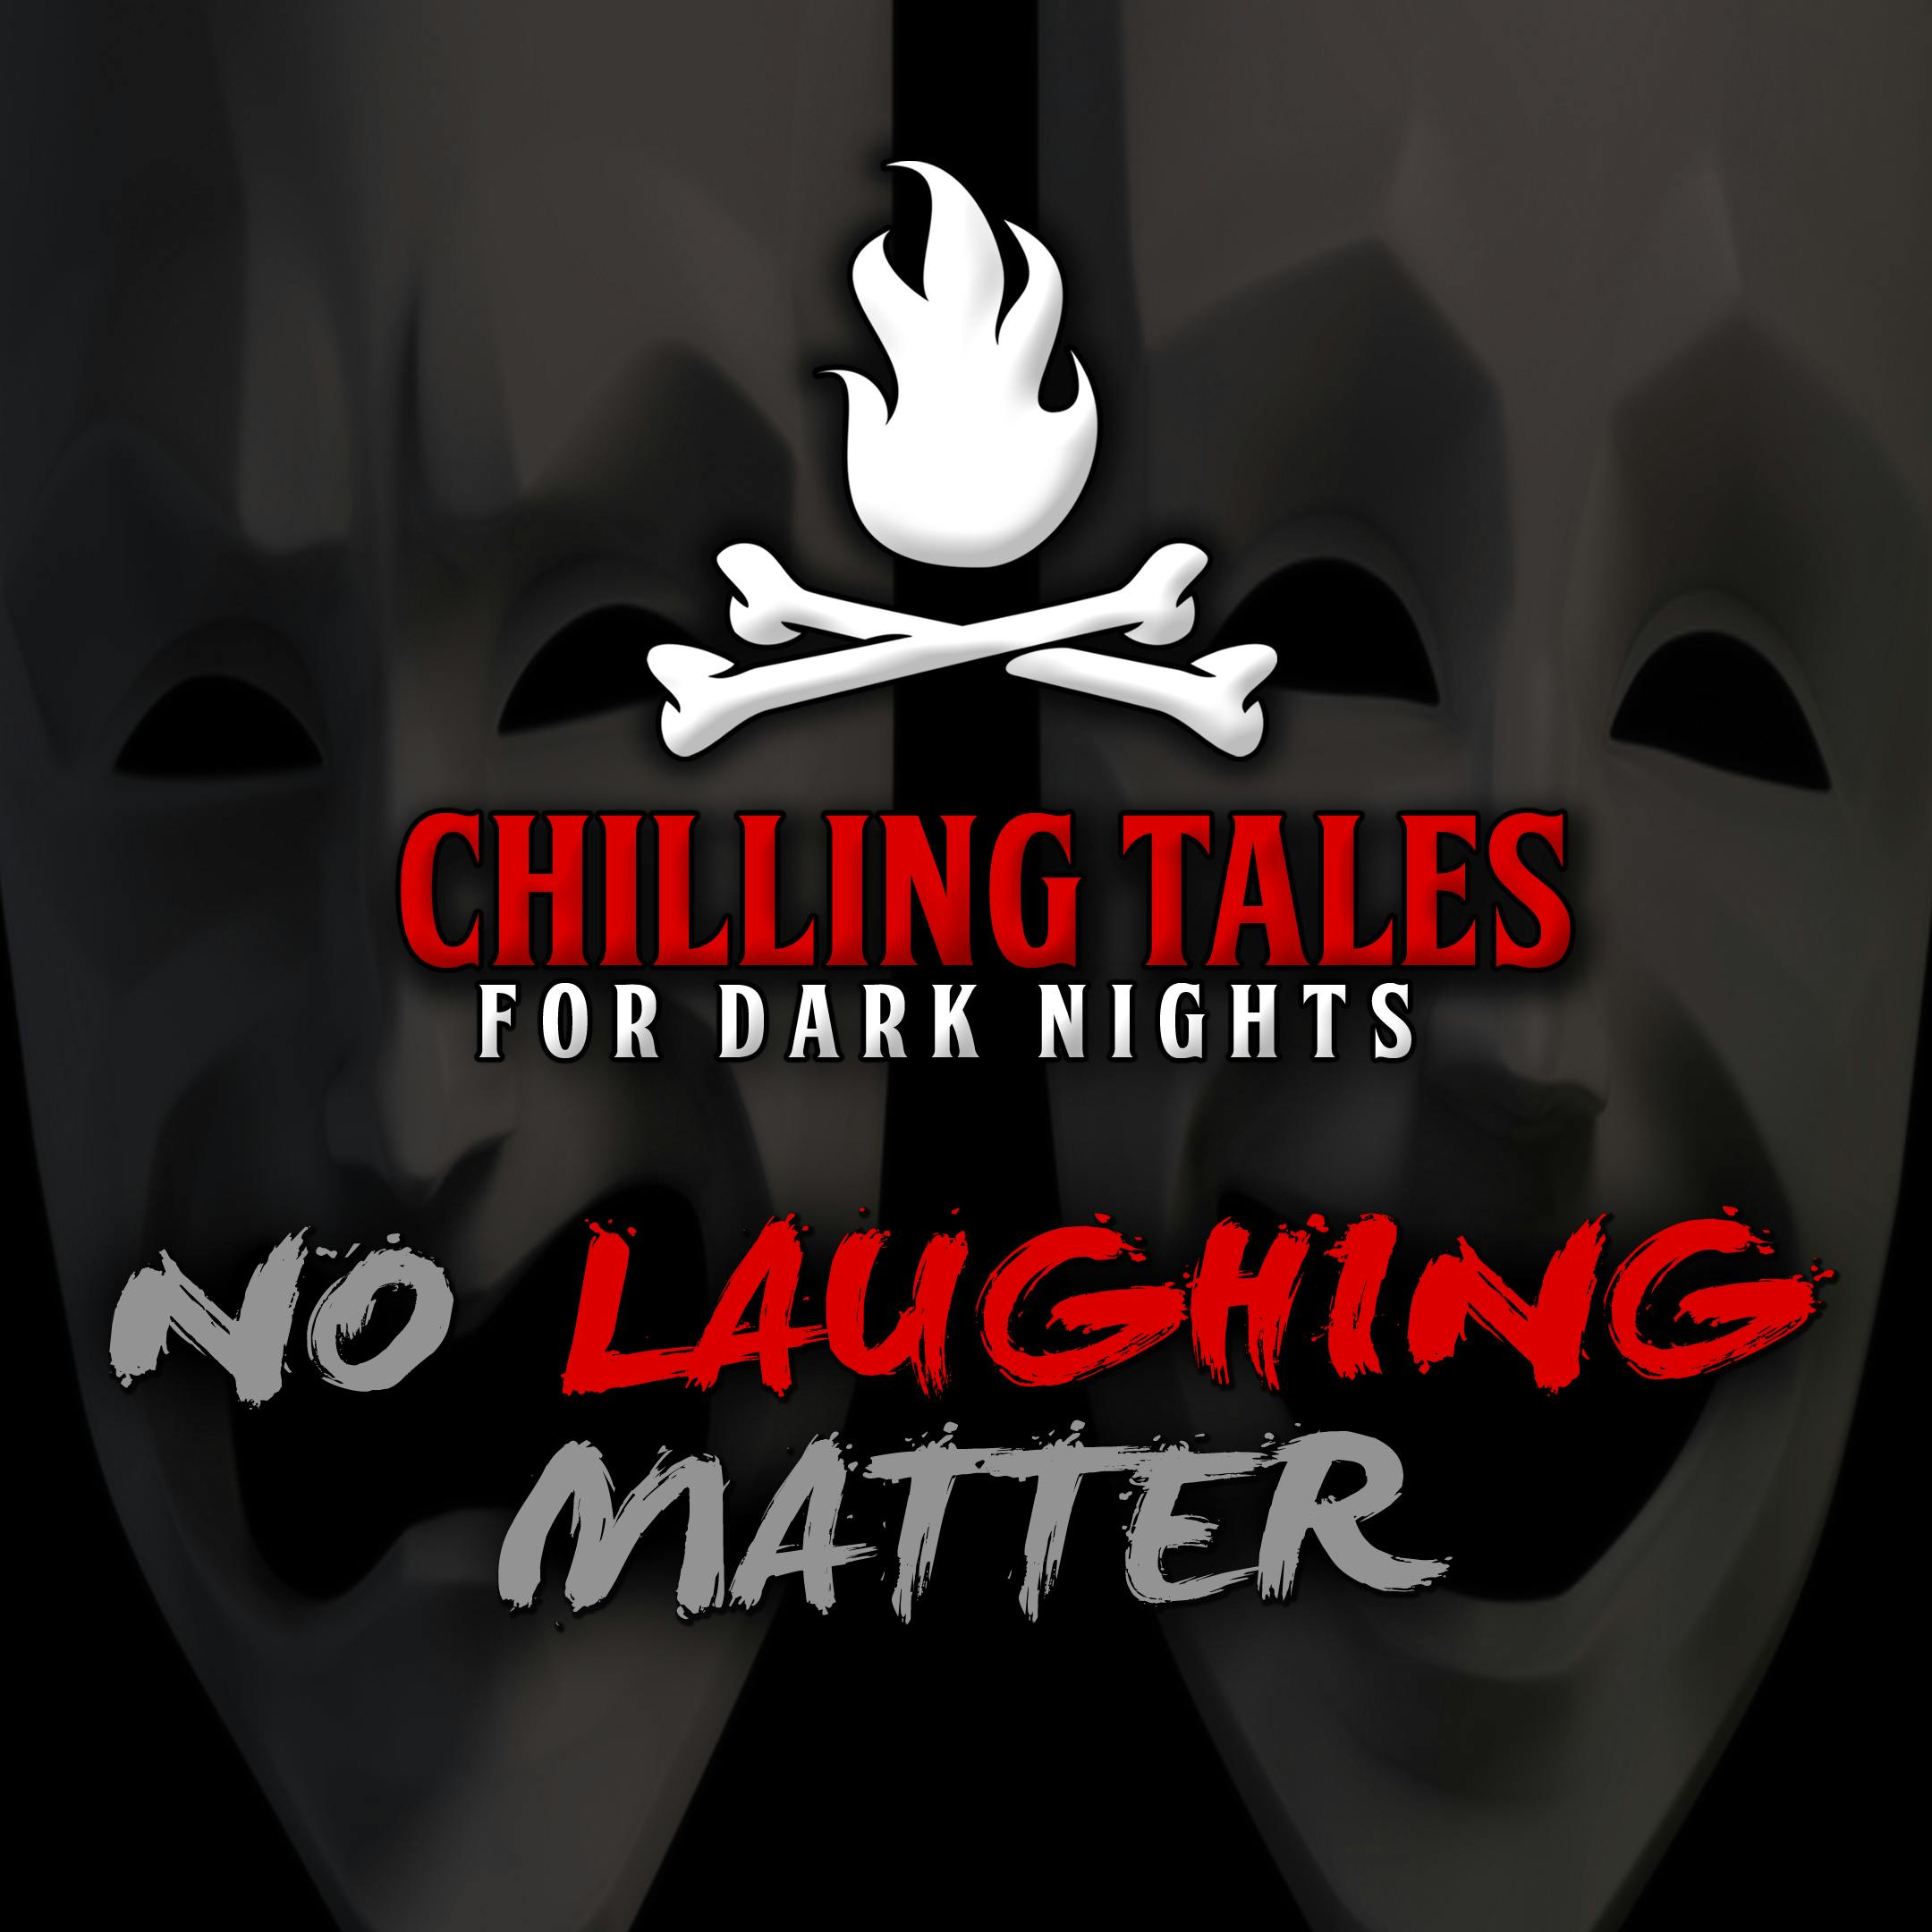 81: No Laughing Matter – Chilling Tales for Dark Nights